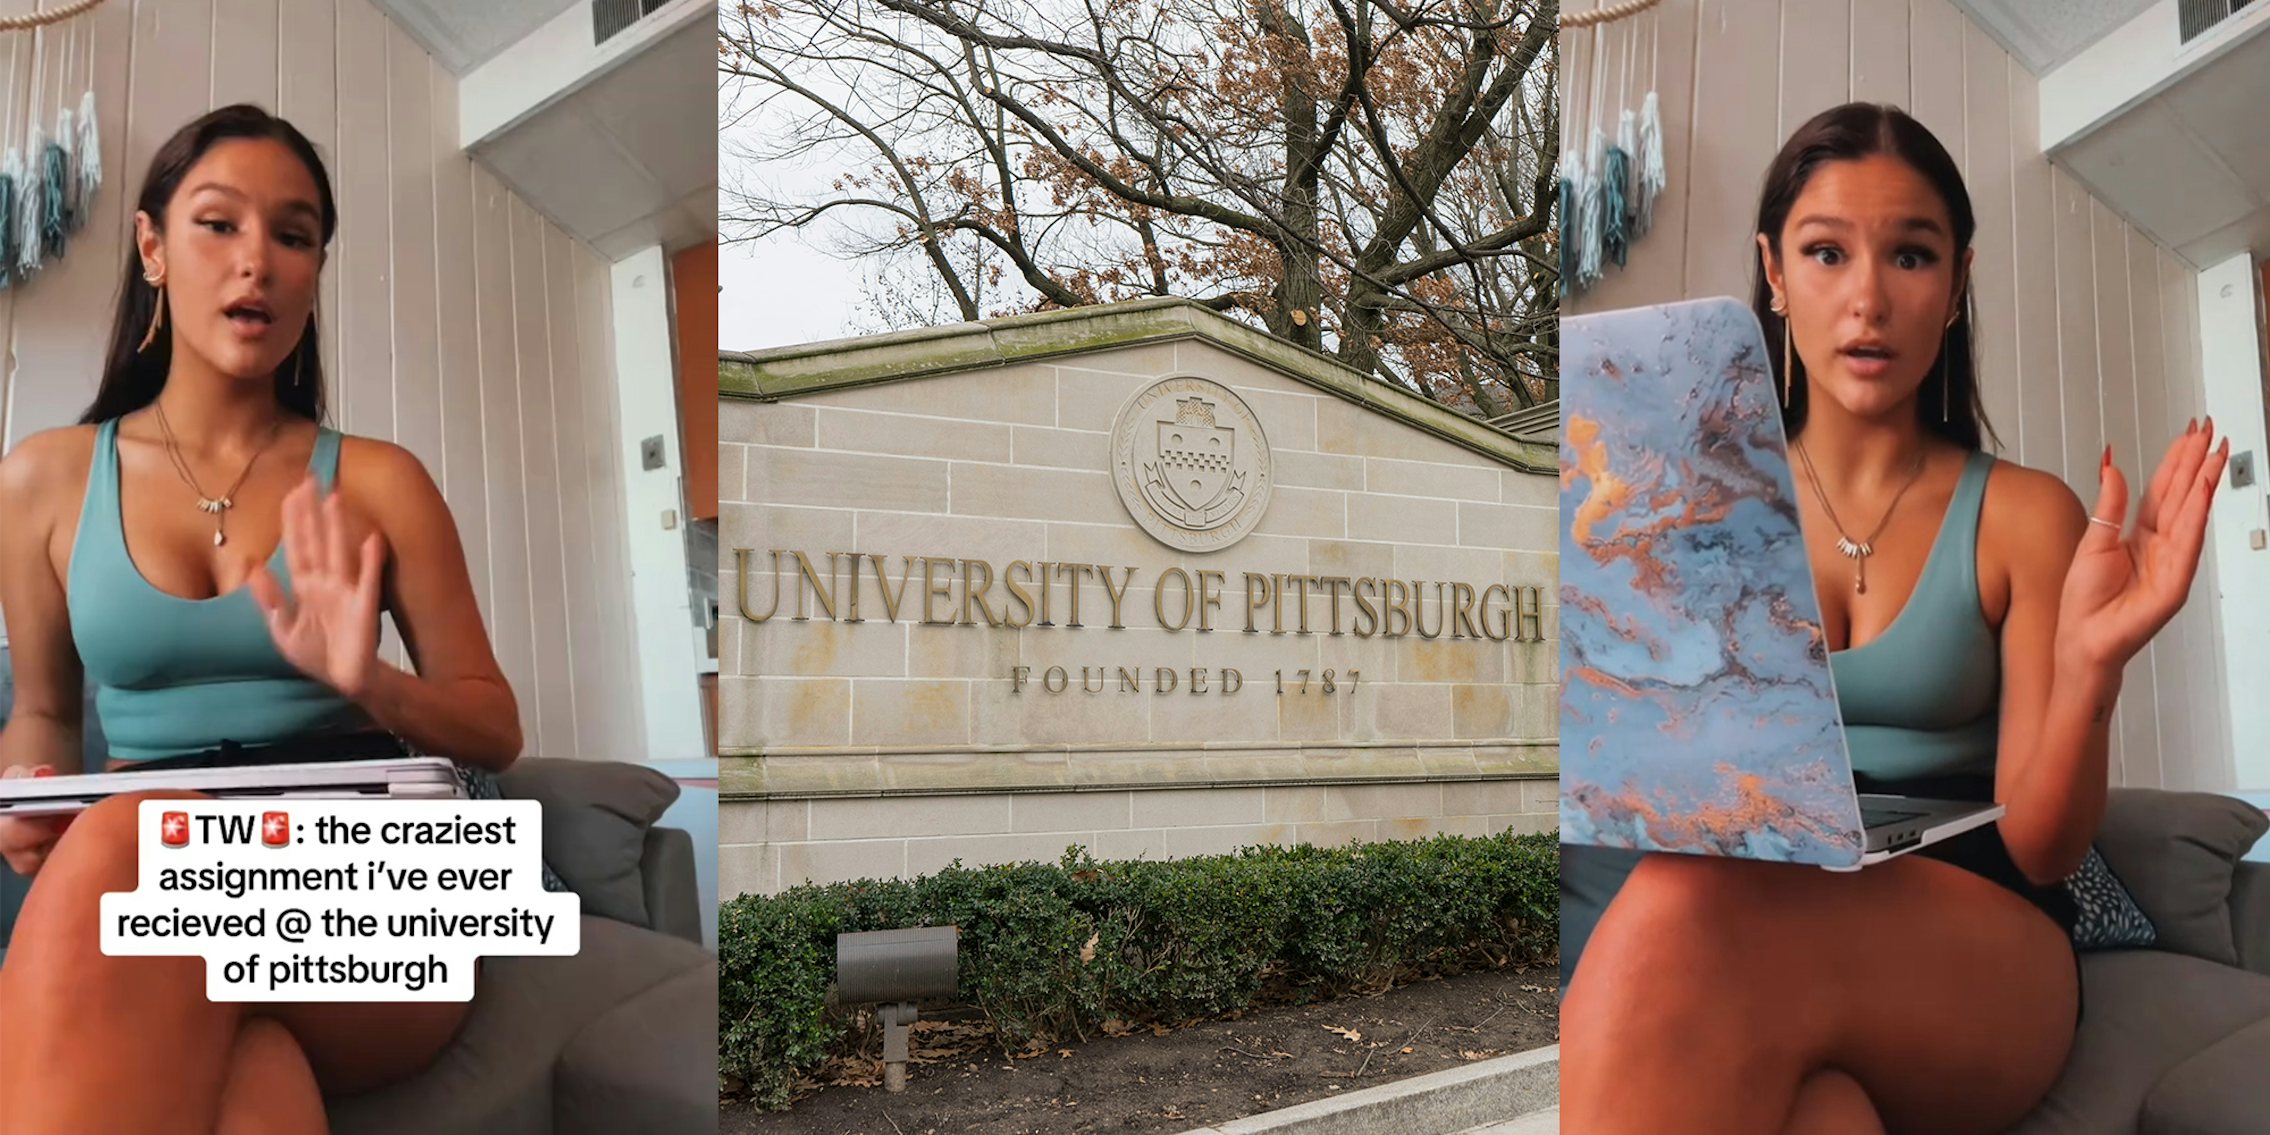 University of Pittsburgh student calls out school for ‘insane’ assignment